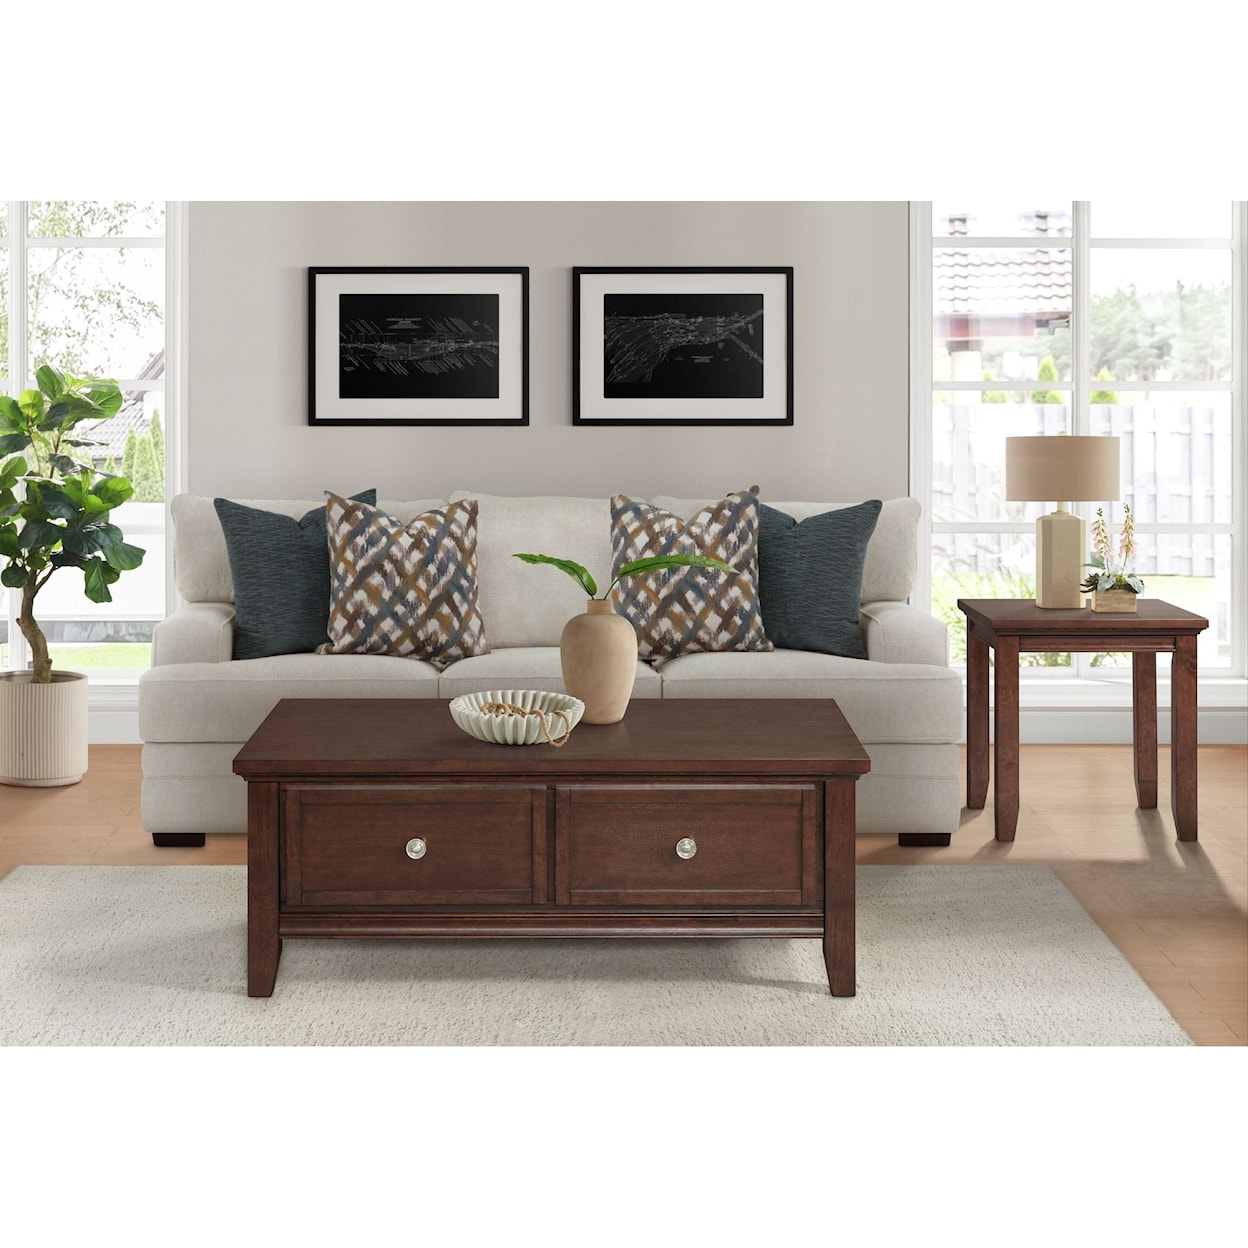 Elements International Chatham Coffee Table with Storage Drawers